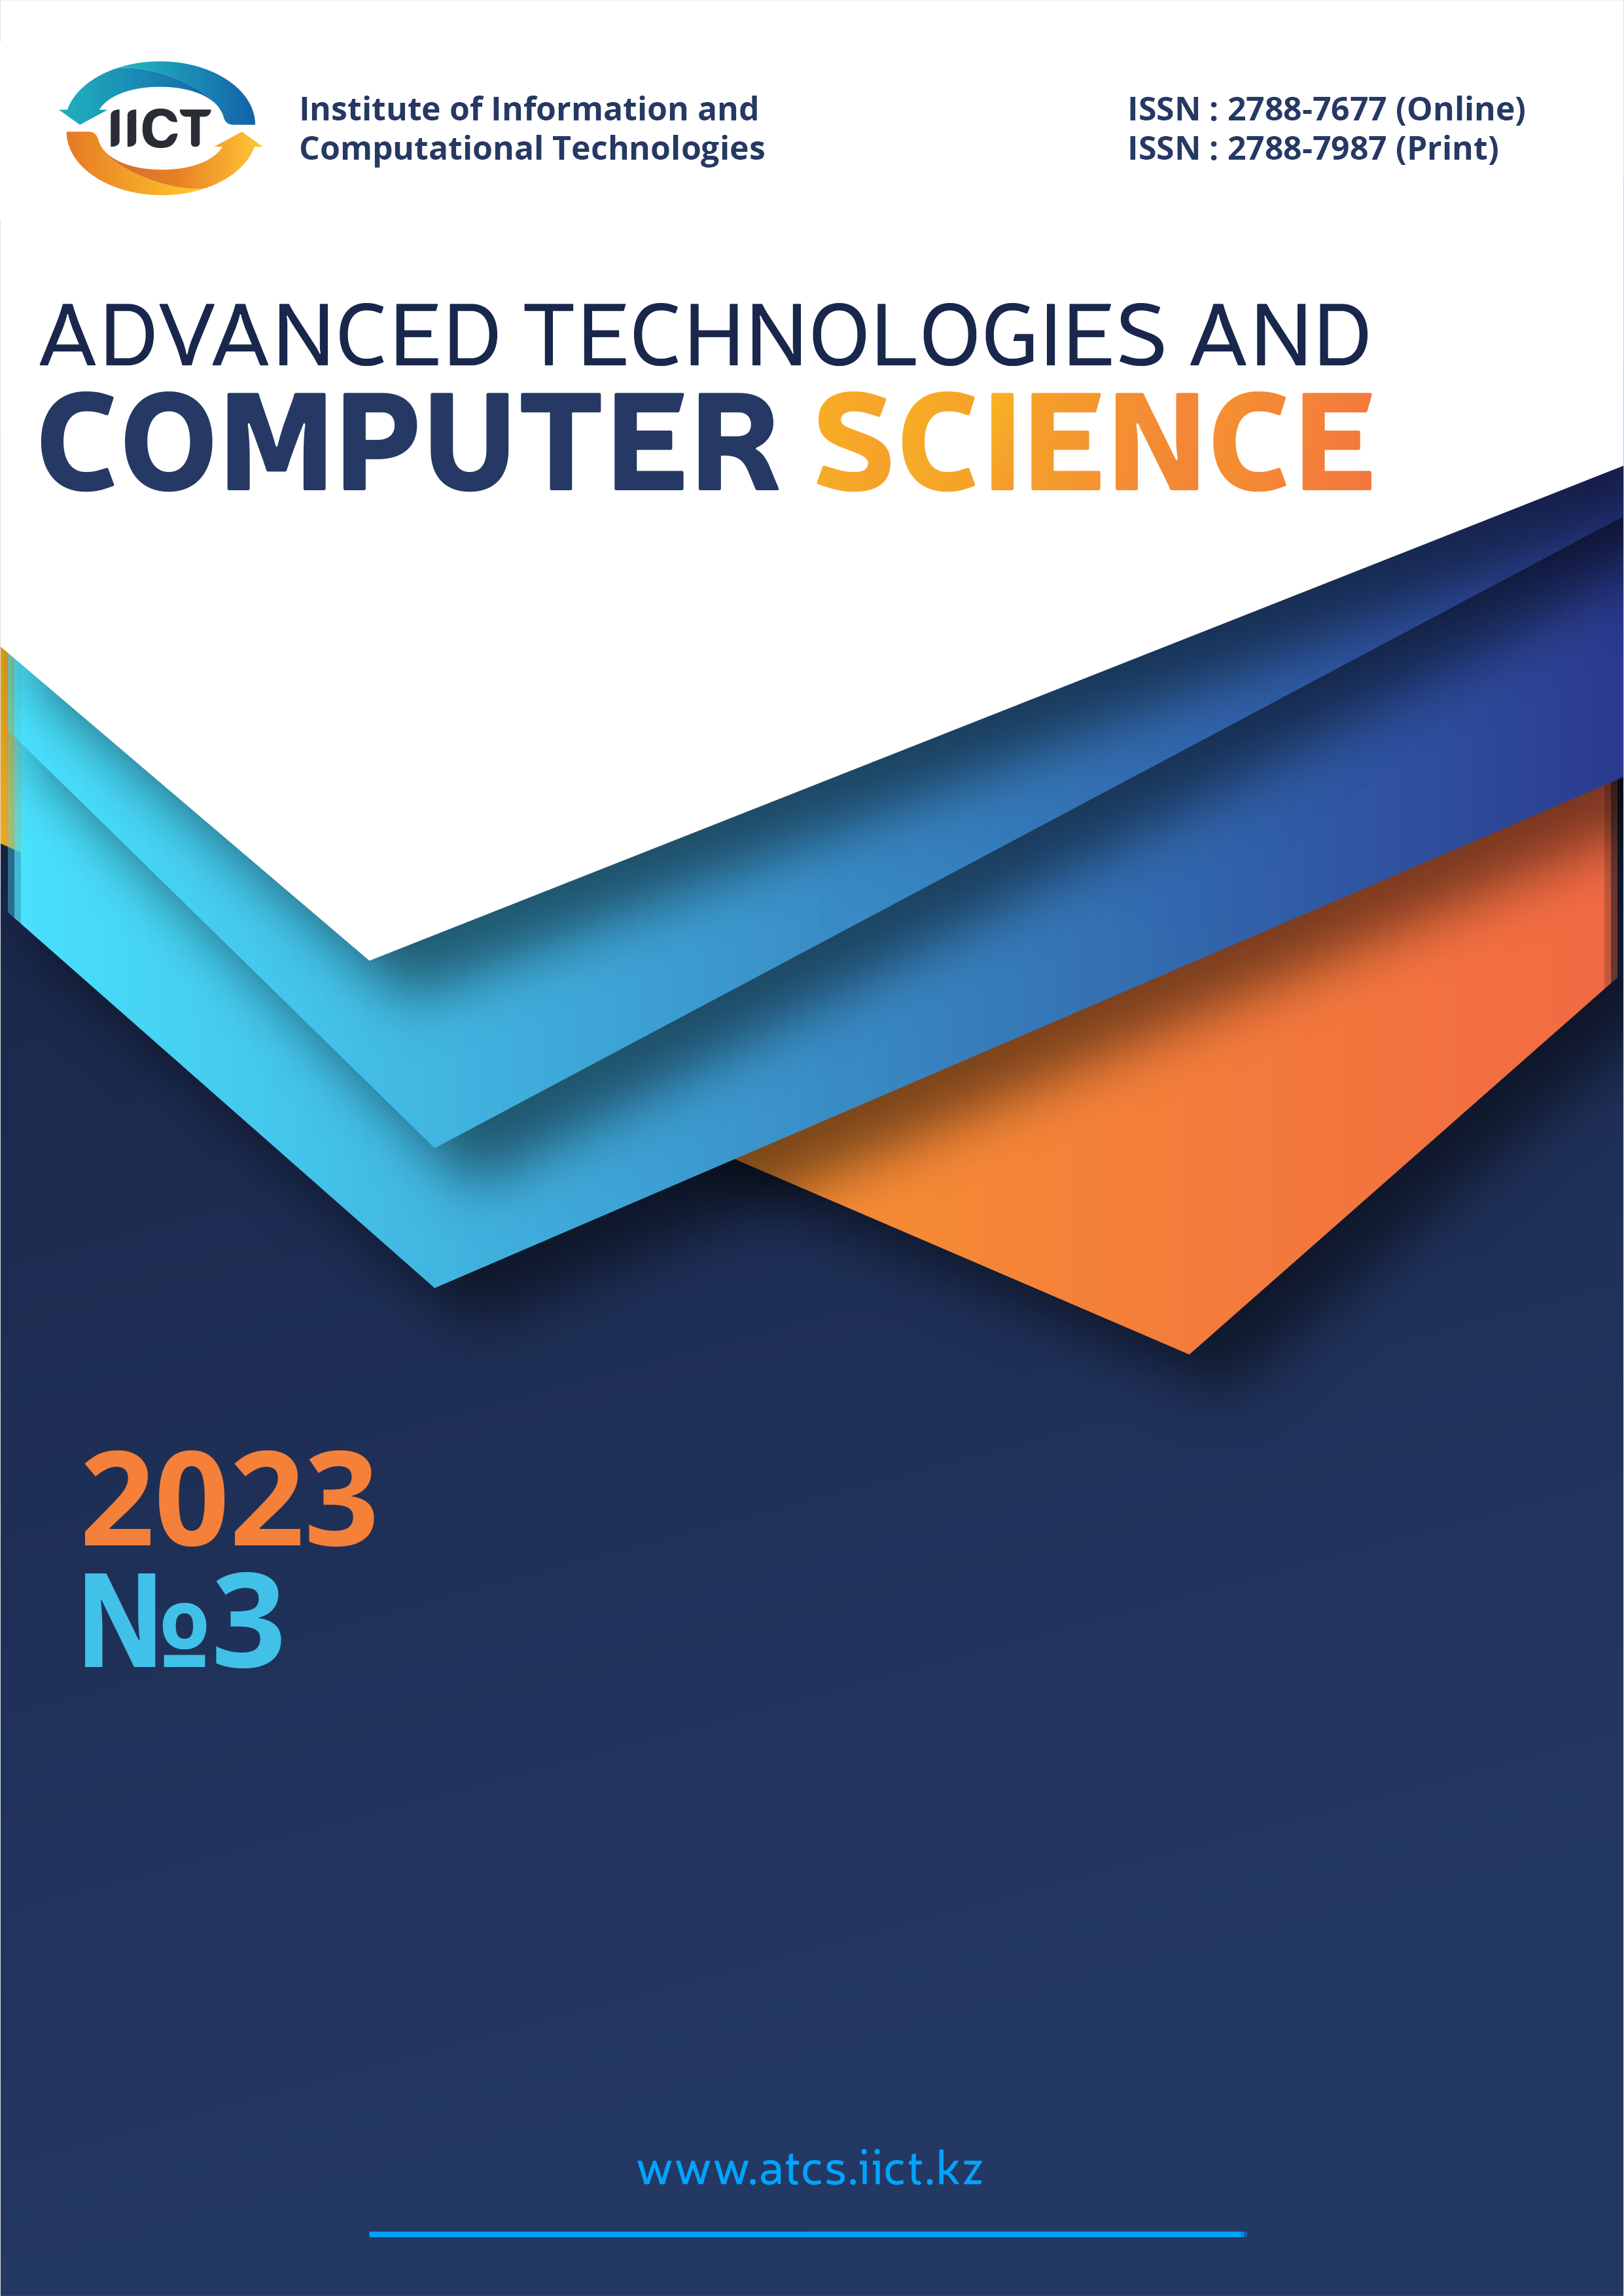 					View Vol. 1 No. 3 (2023): ADVANCED TECHNOLOGIES AND COMPUTER SCIENCE
				